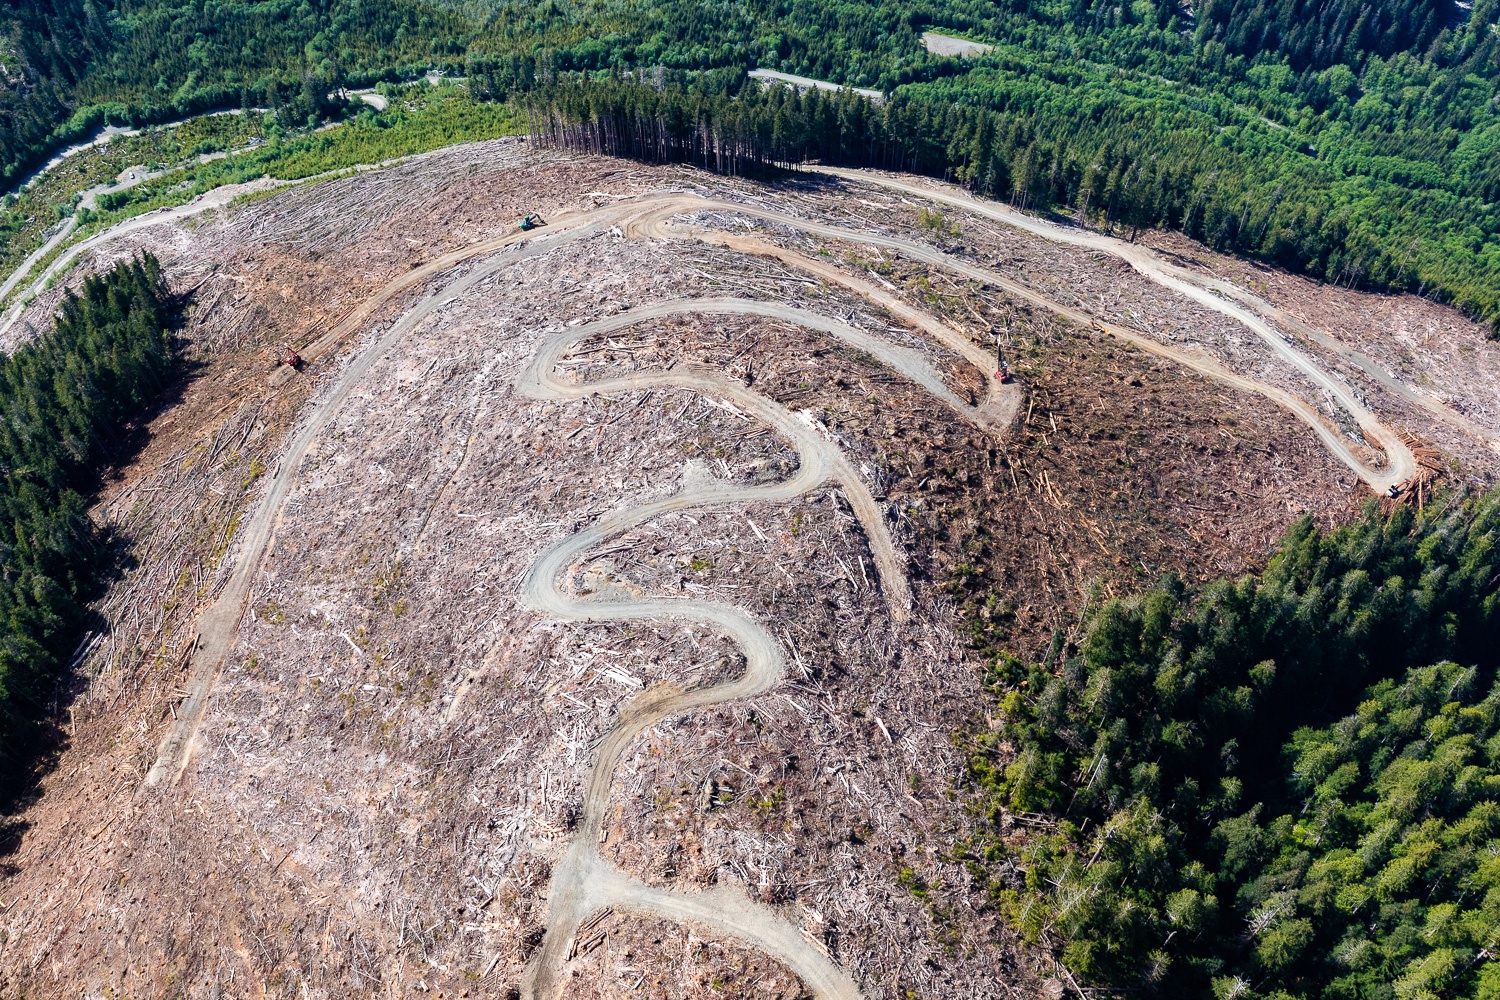 Logging in the Klanawa Valley: “World’s best forestry practices”?